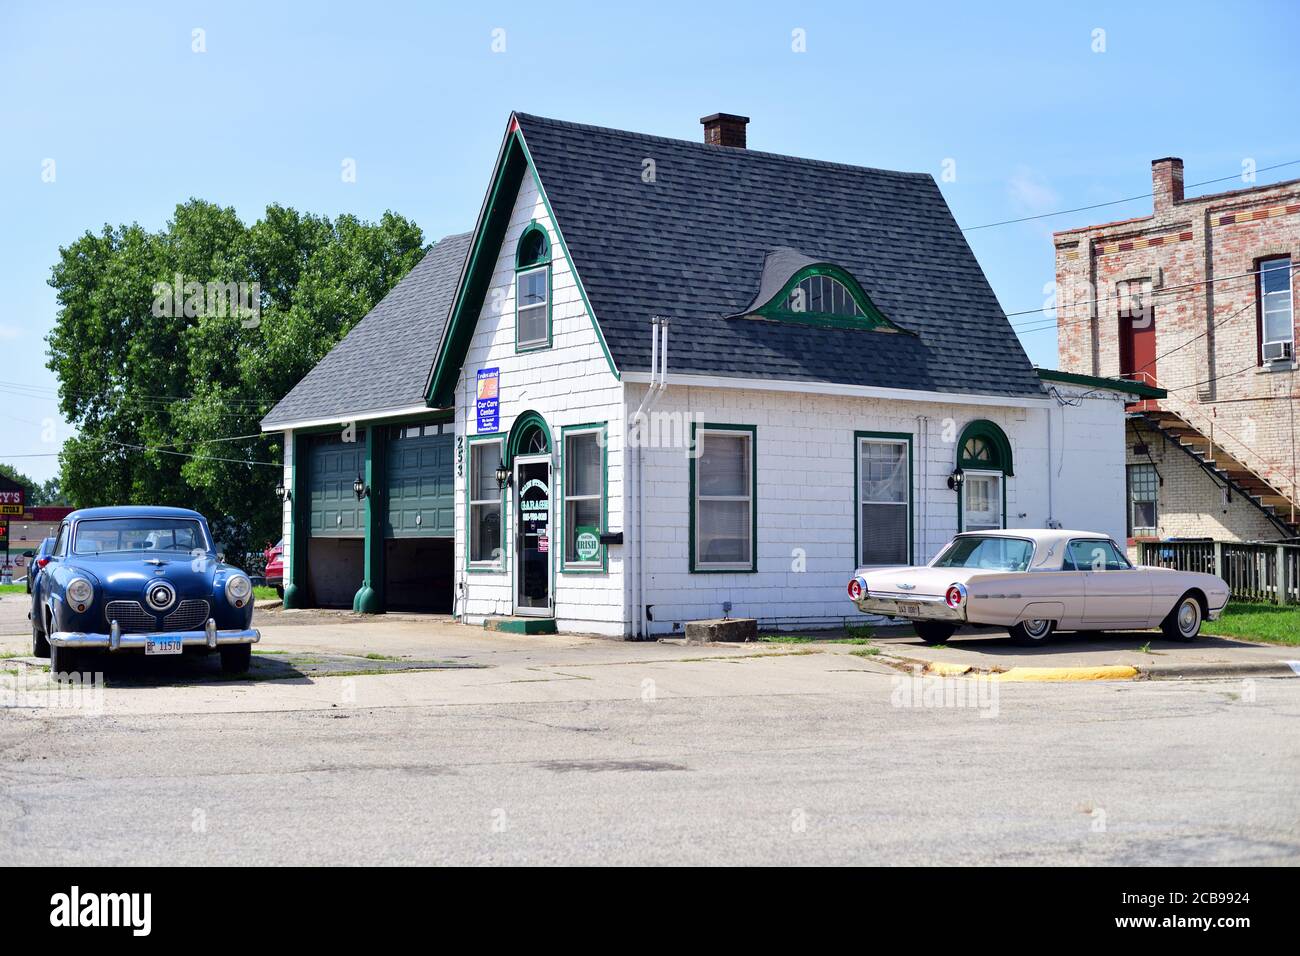 Seneca, Illinois, USA. An old garage with two antique vehicles parked on the property including a 1951 Studebaker and an antique Ford Thunderbird. Stock Photo